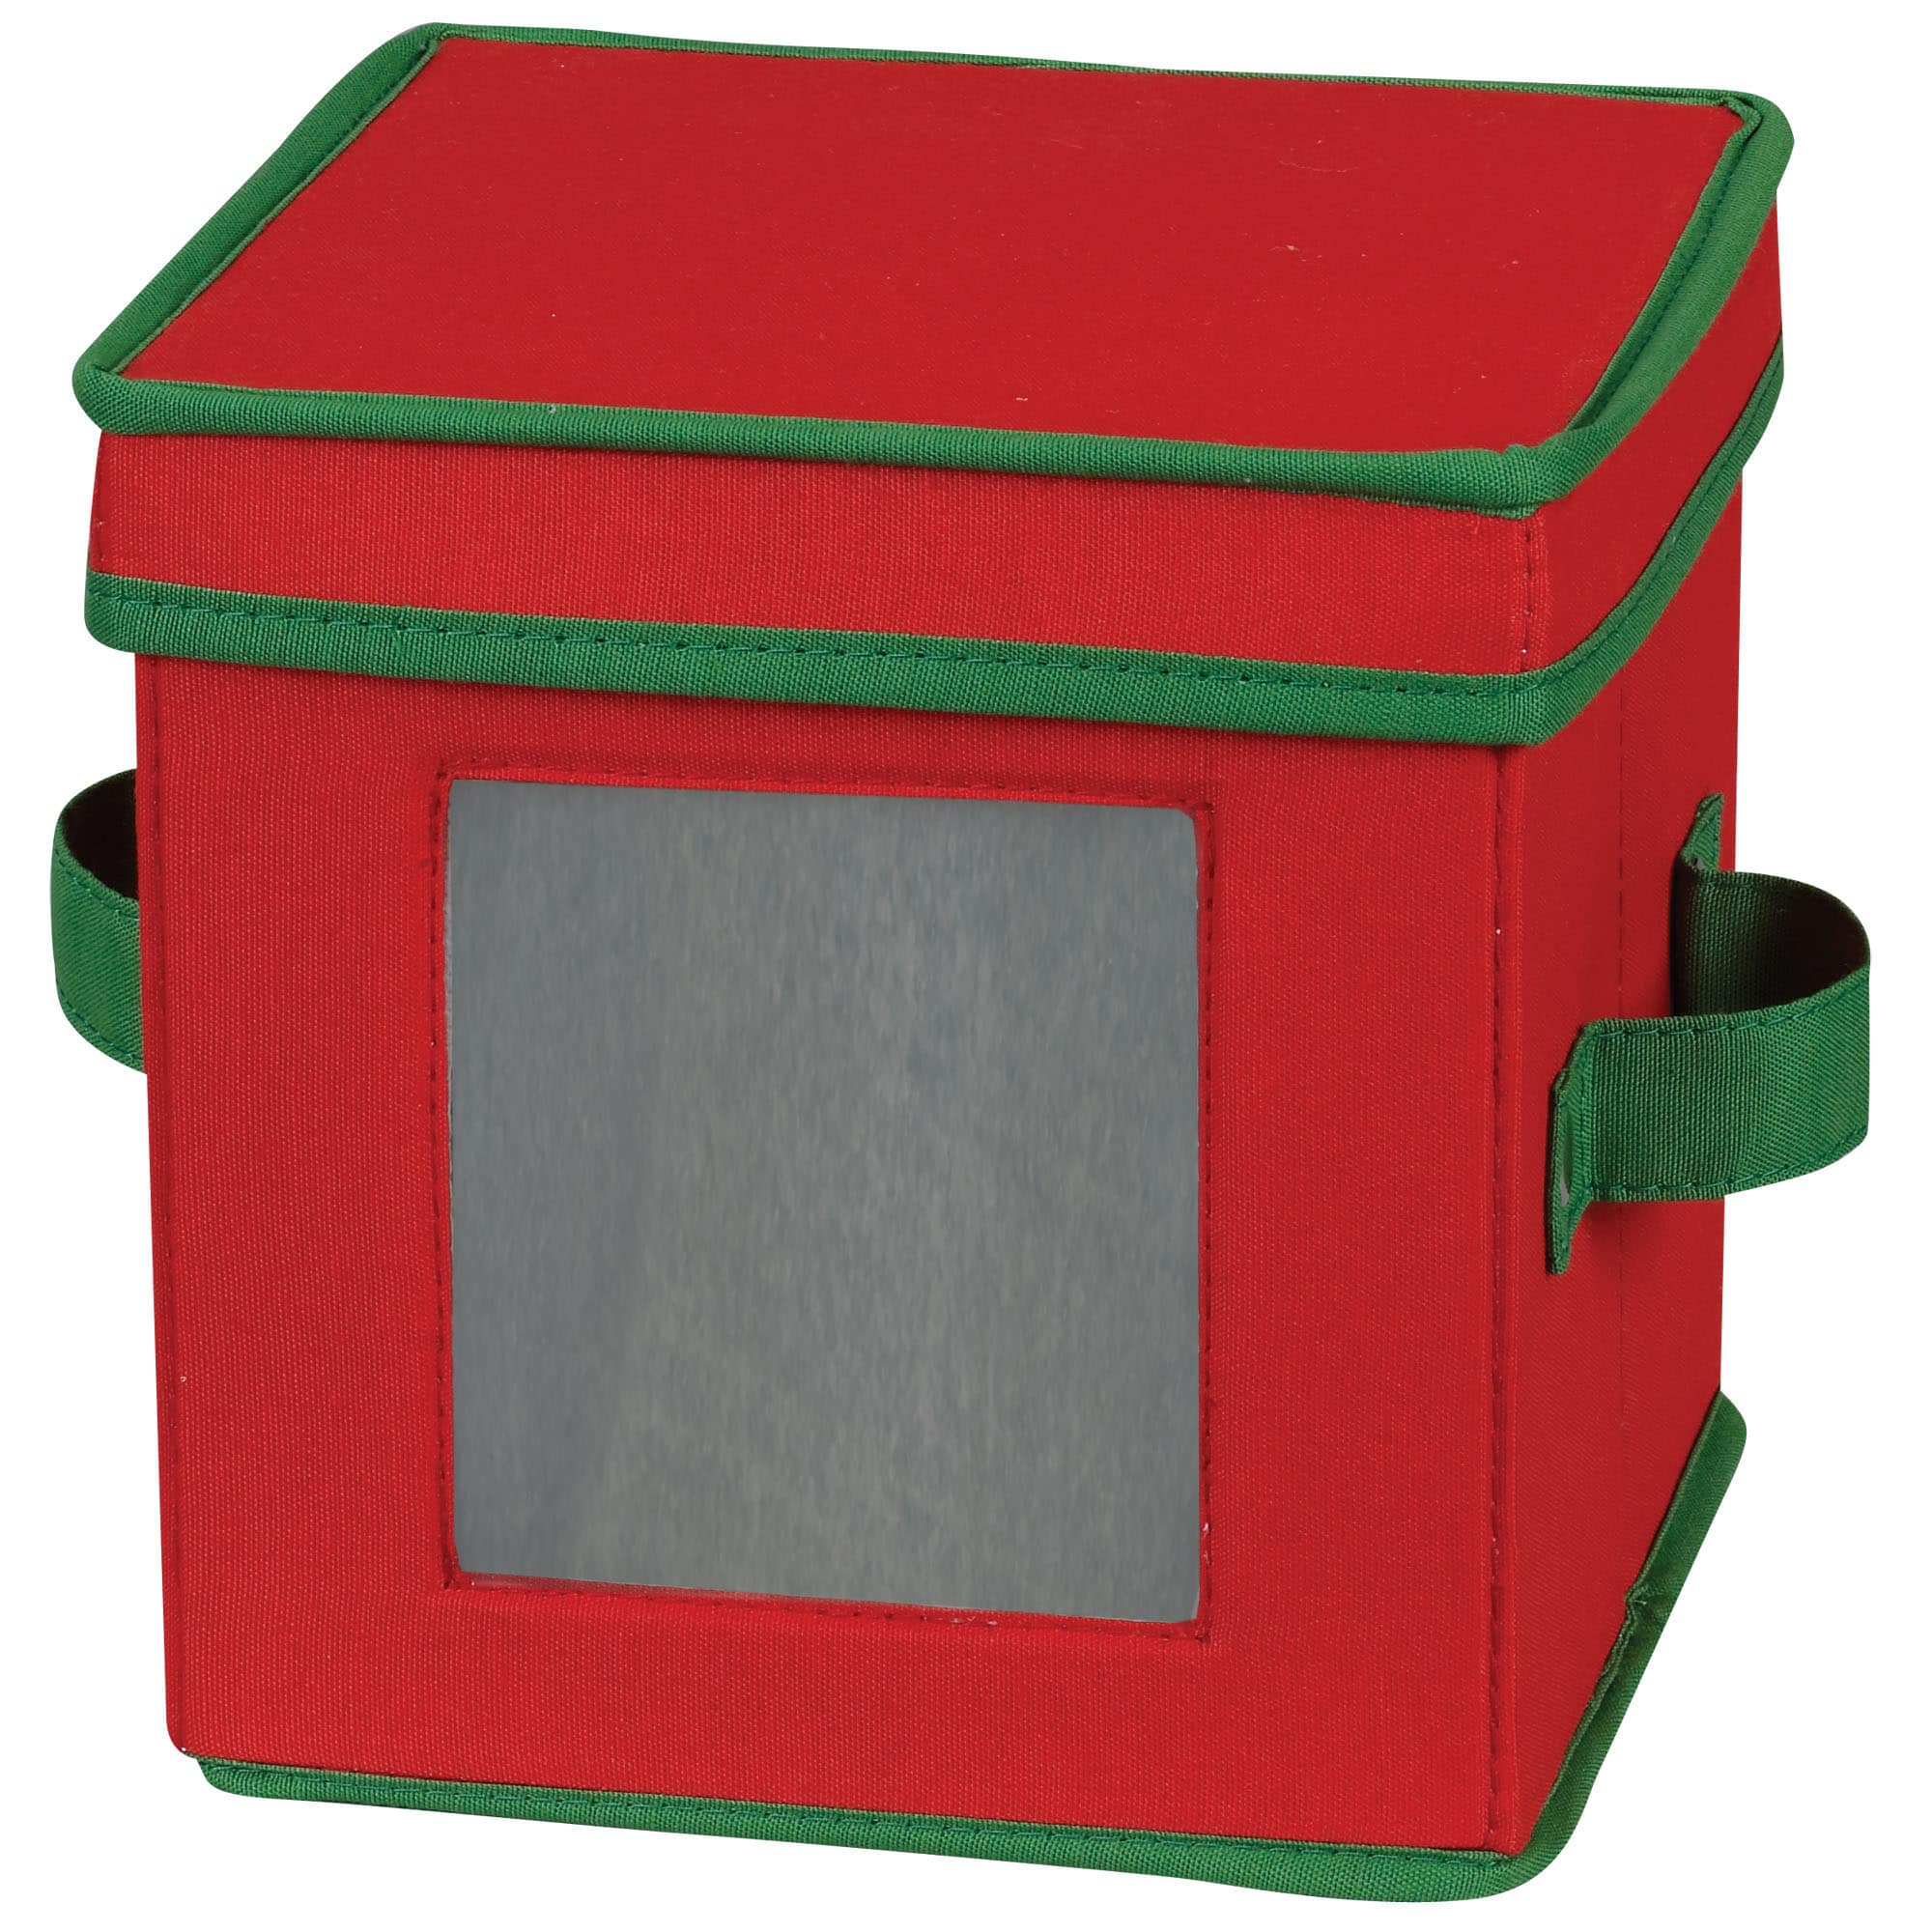 Household Essentials 7.5-in W x 8-in H x 8-in D Red with Green Trim